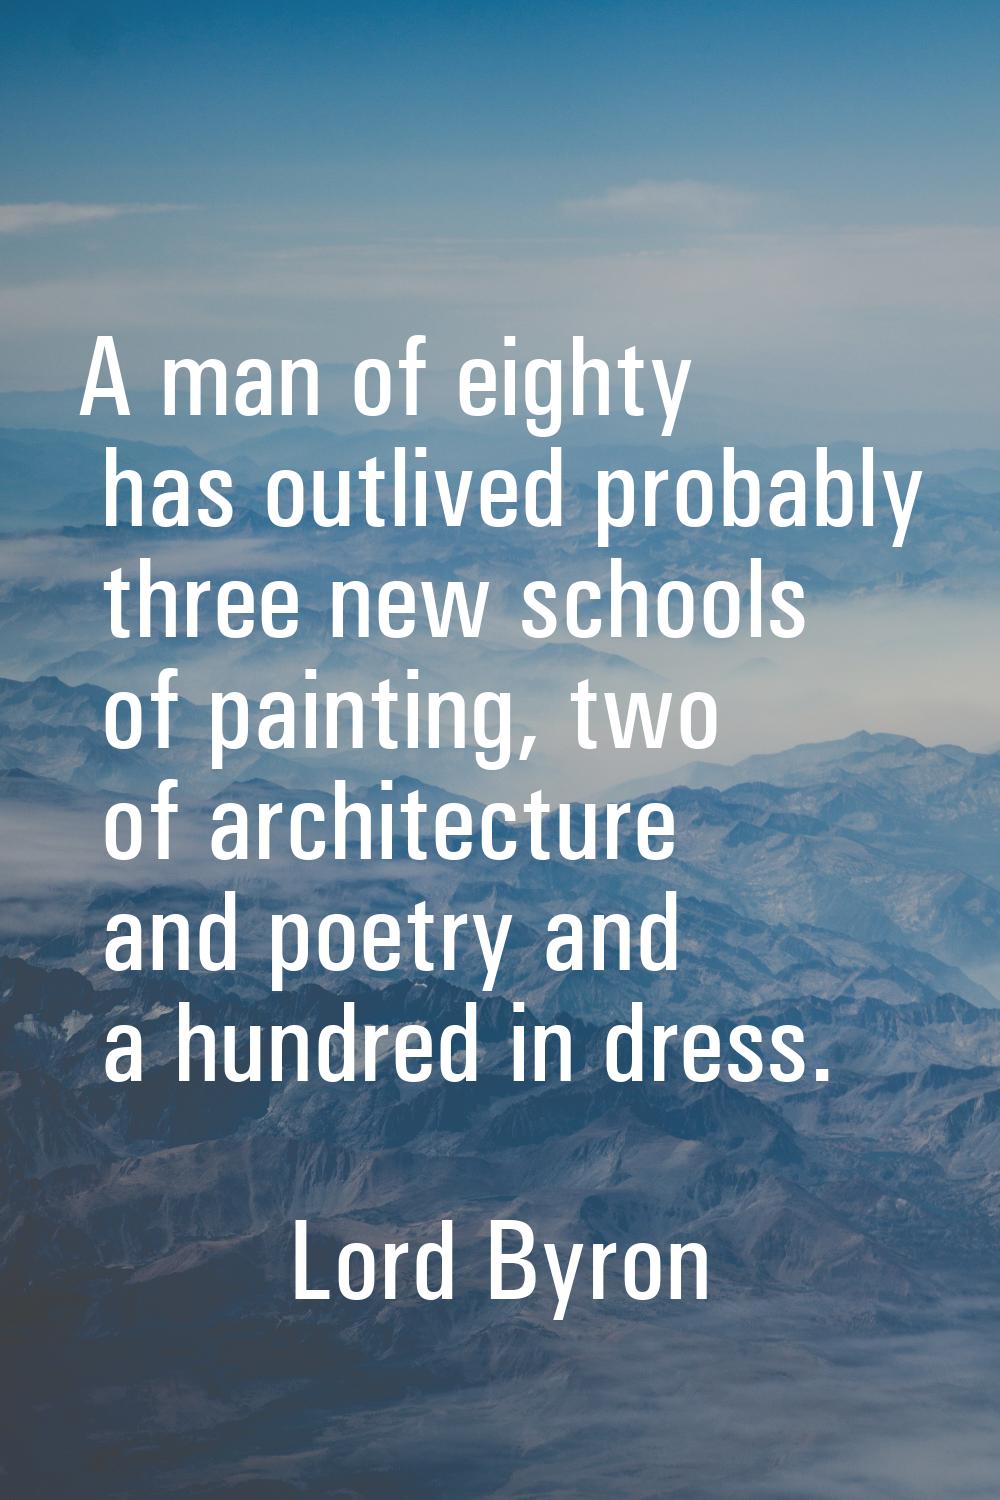 A man of eighty has outlived probably three new schools of painting, two of architecture and poetry